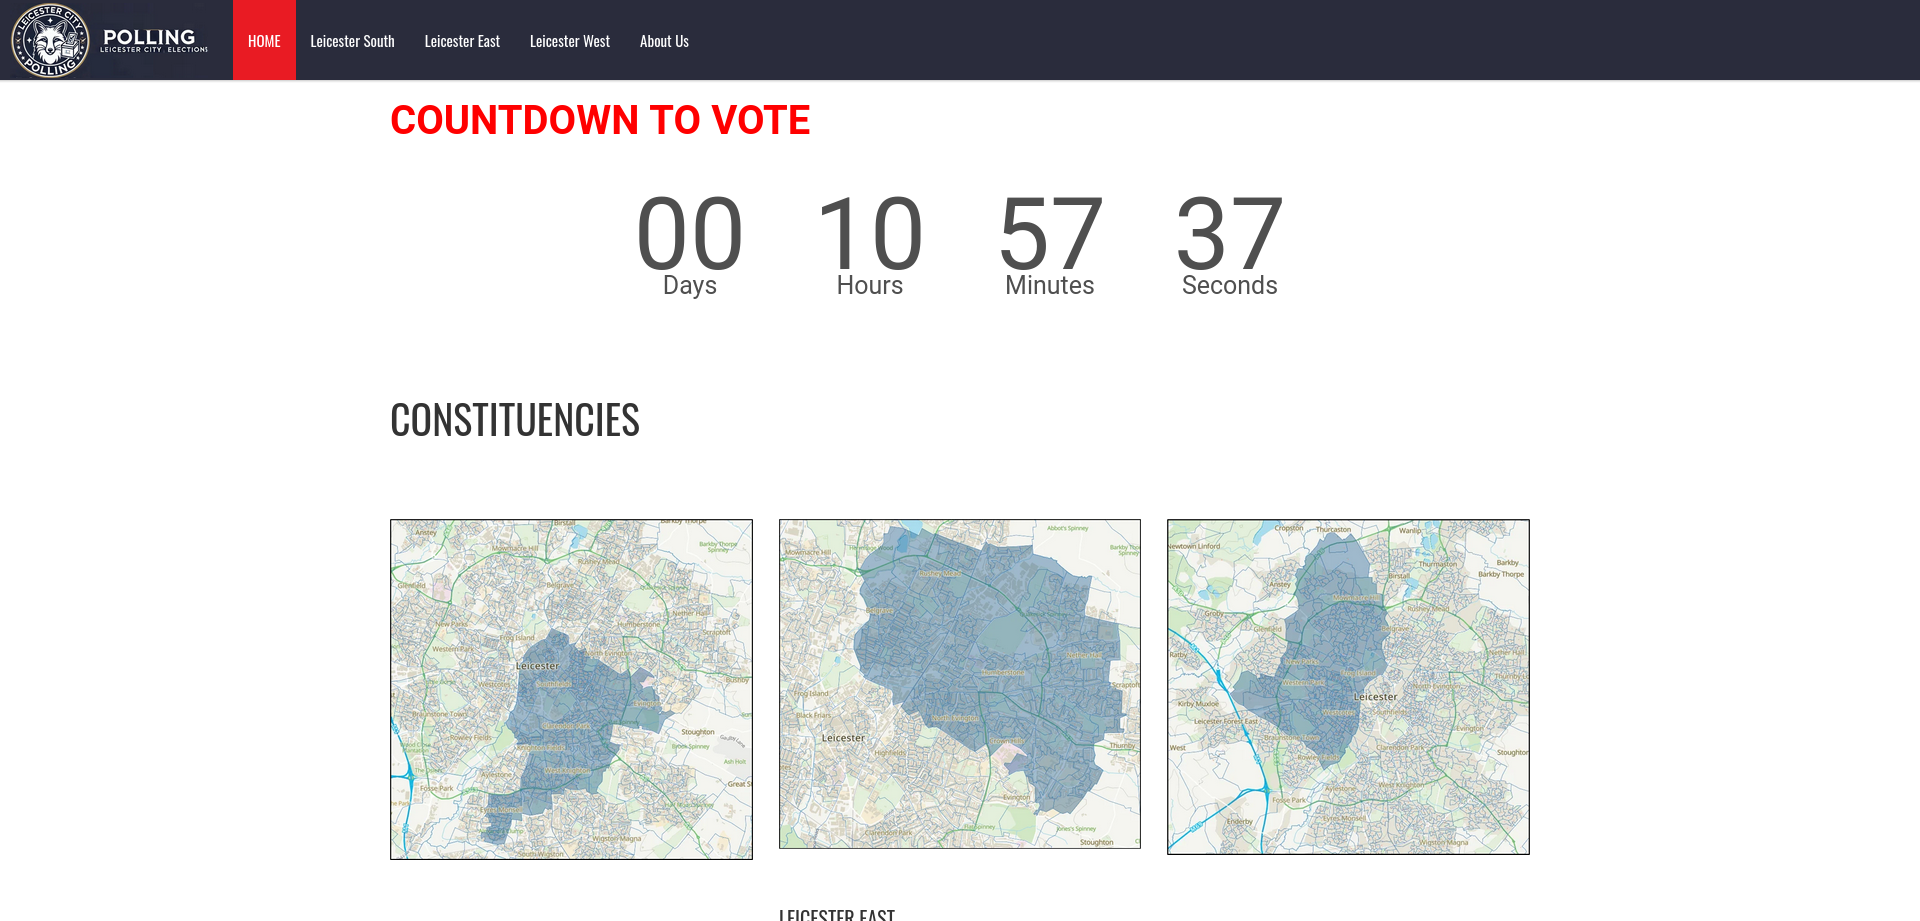 The website's home page with a countdown to vote and maps of the constituencies.